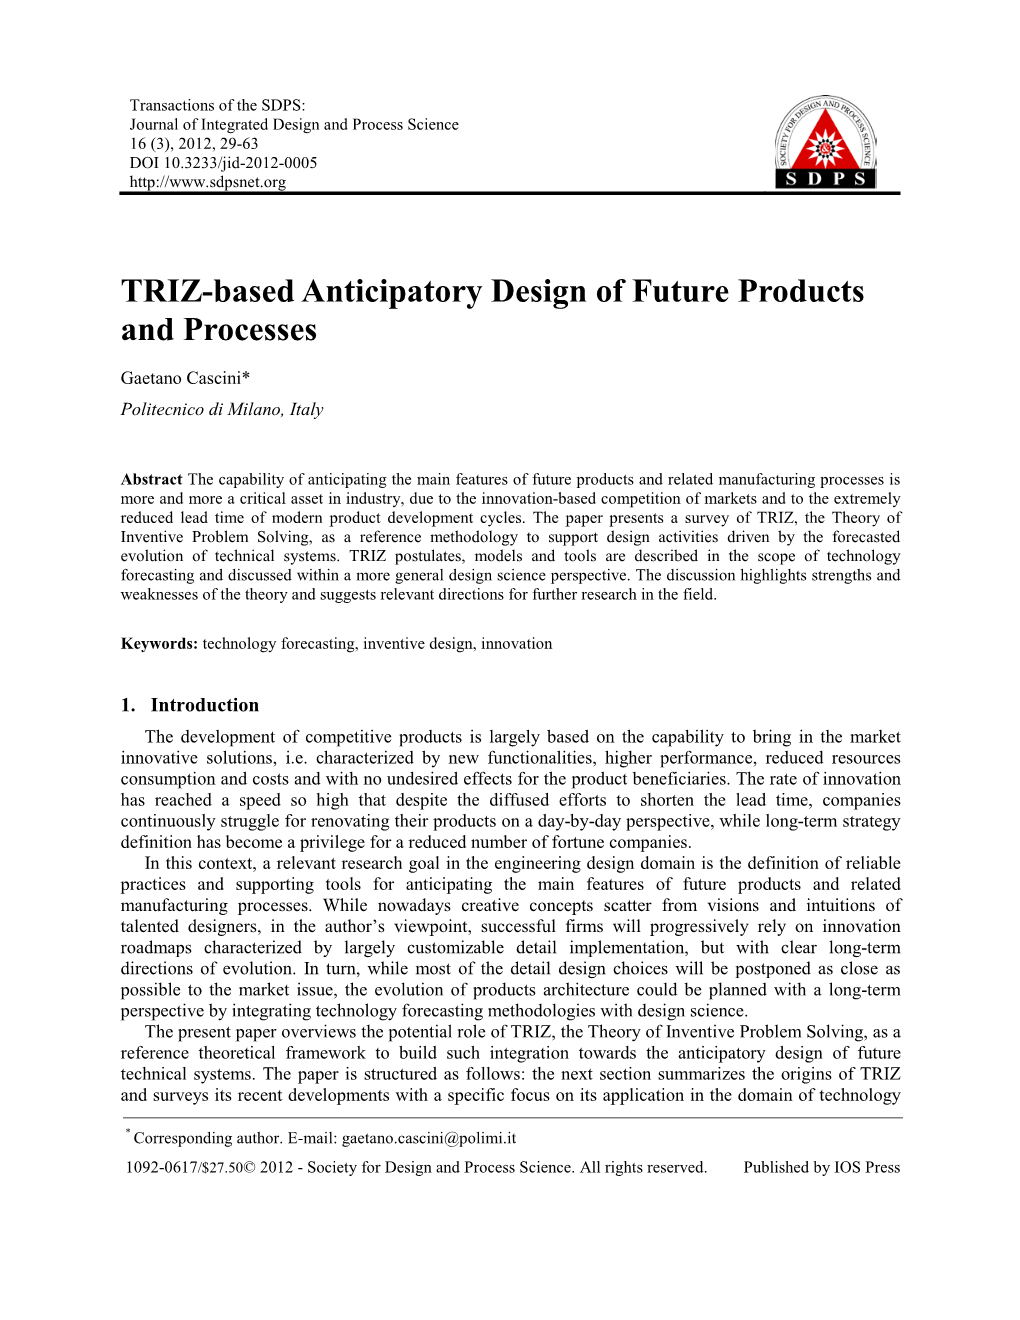 TRIZ-Based Anticipatory Design of Future Products and Processes